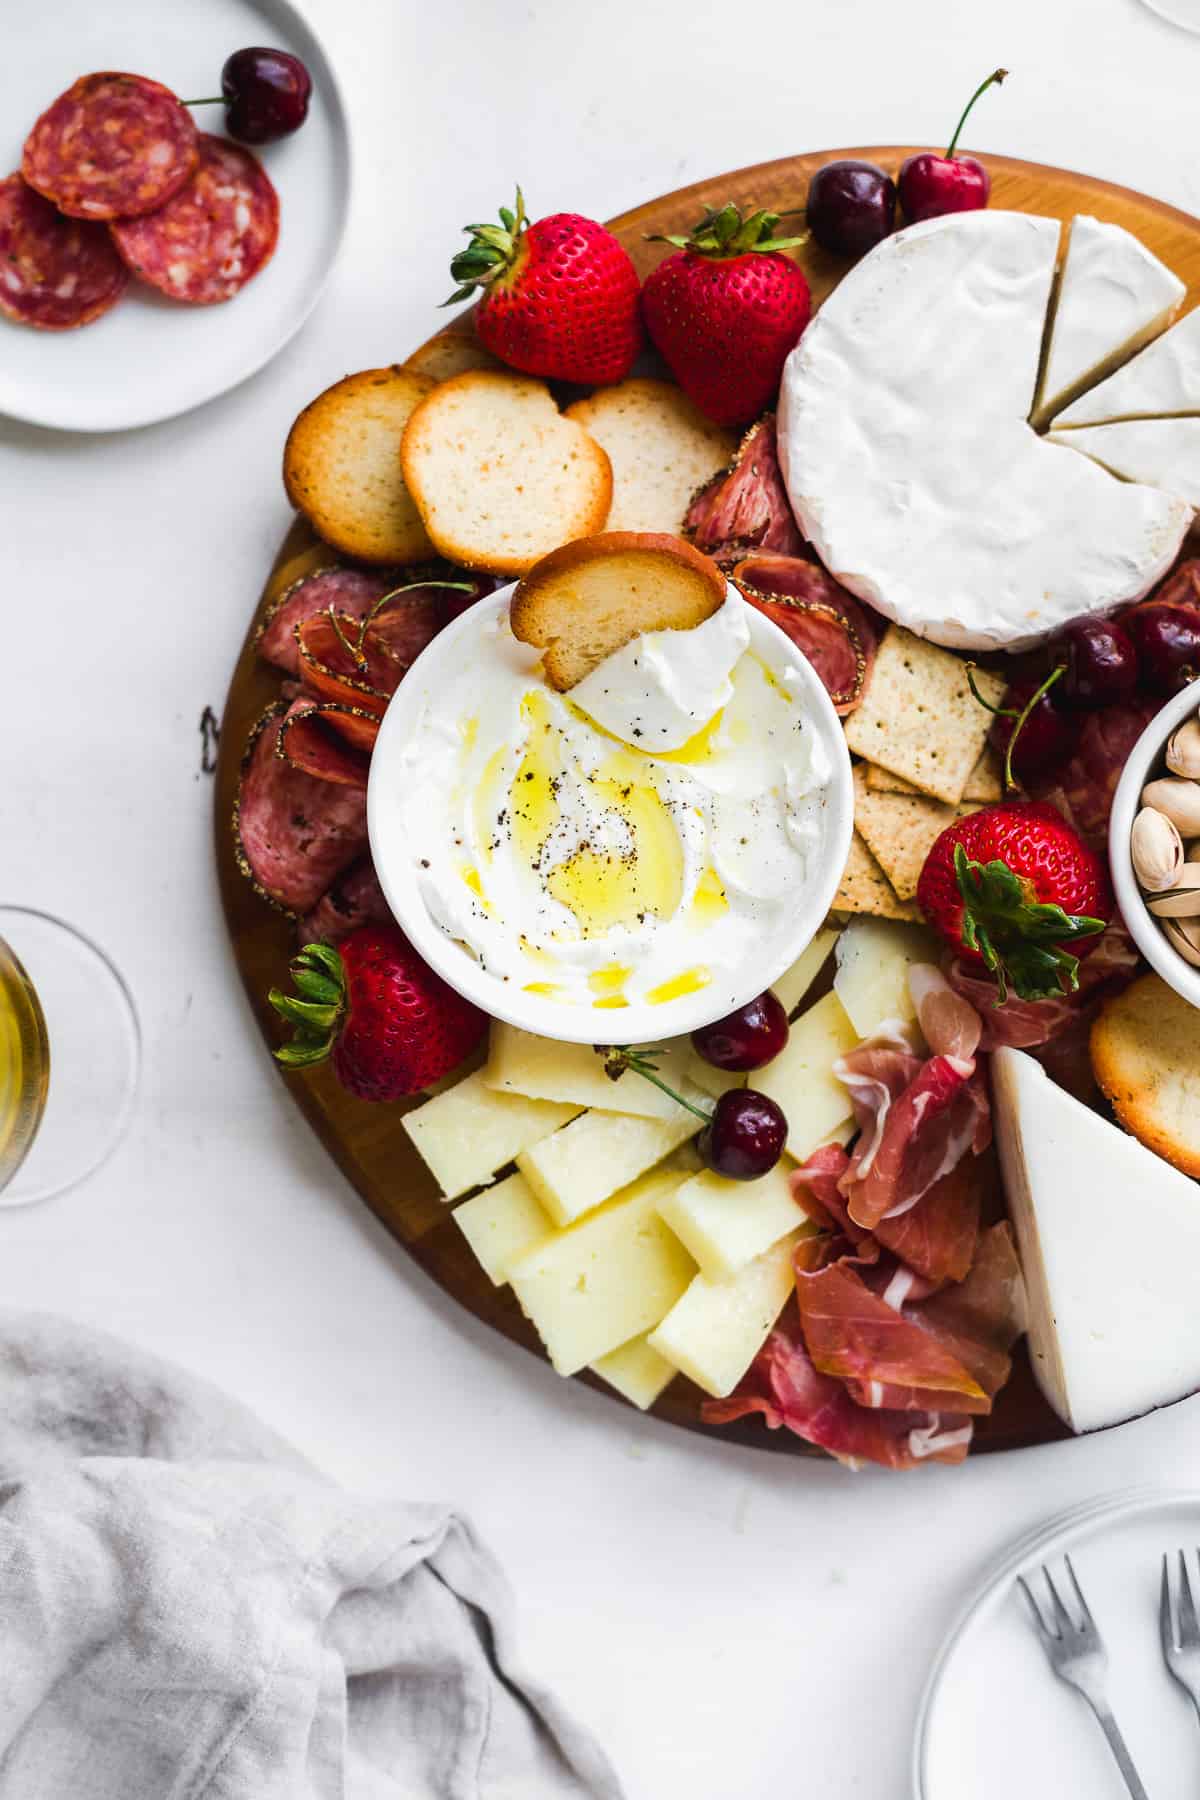 Circular platter with meat and cheeses and glass of wine on the side.